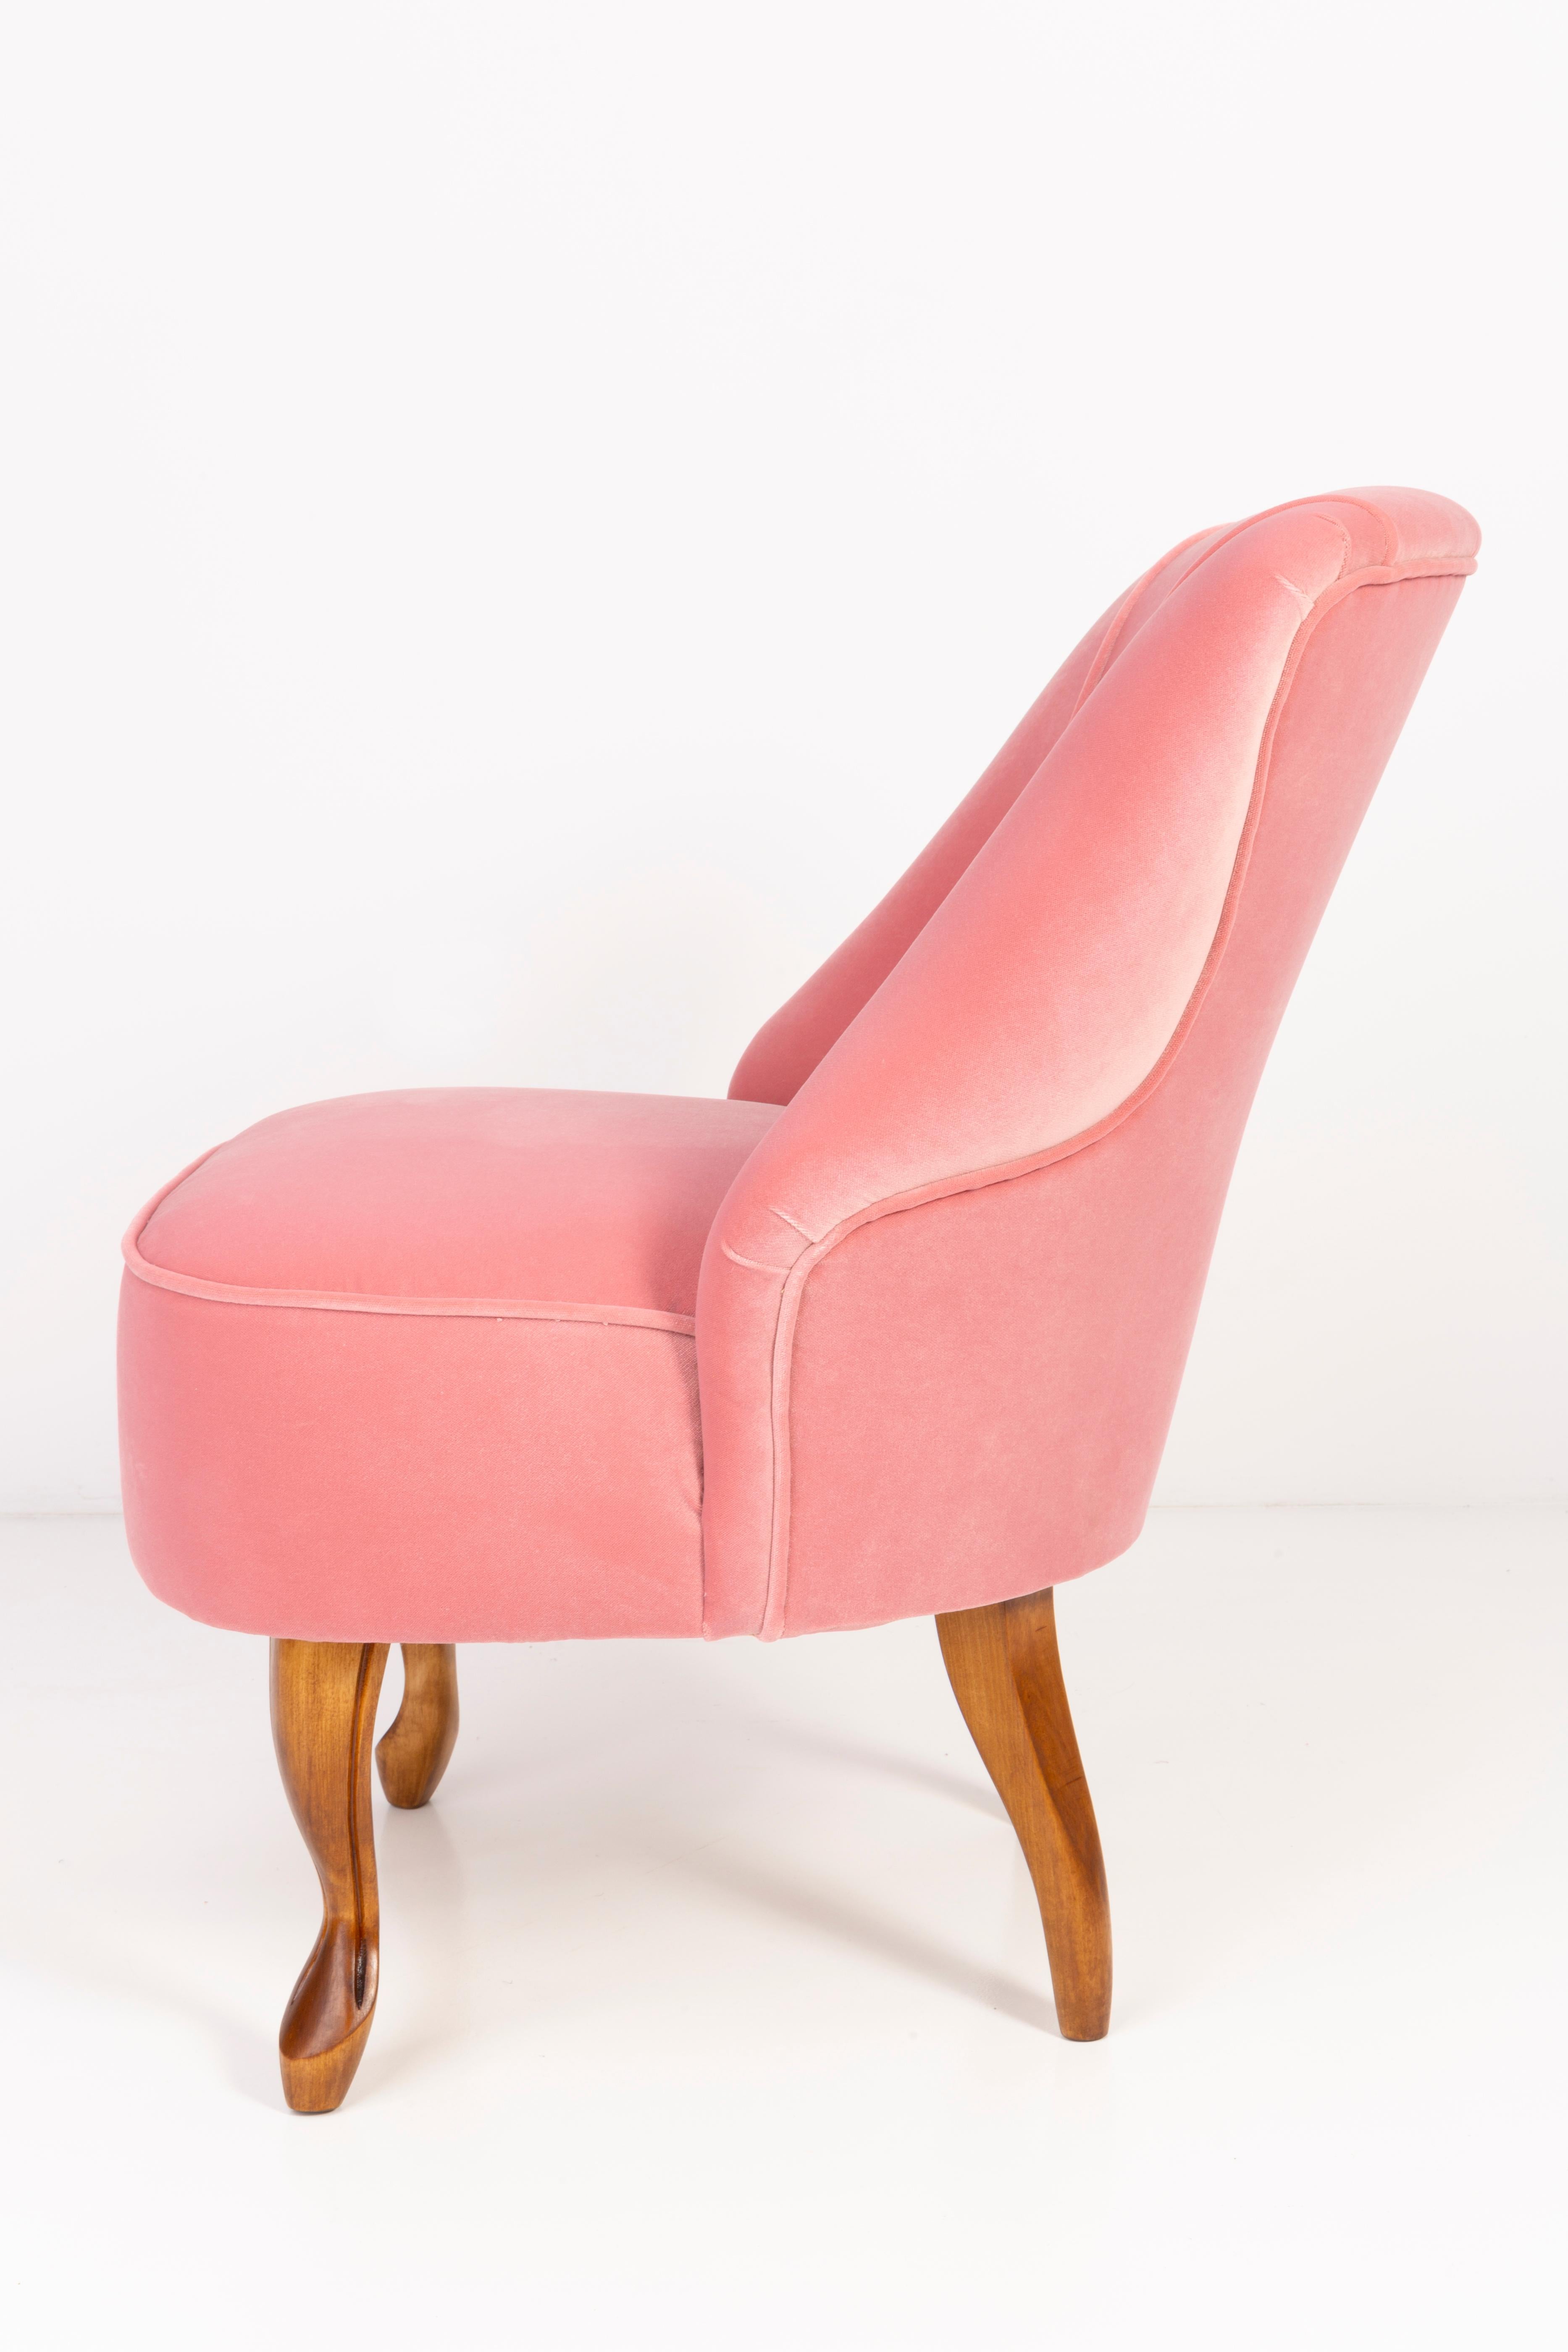 Set of Two 20th Century Art Deco Baby Pink Armchairs, 1950s For Sale 2